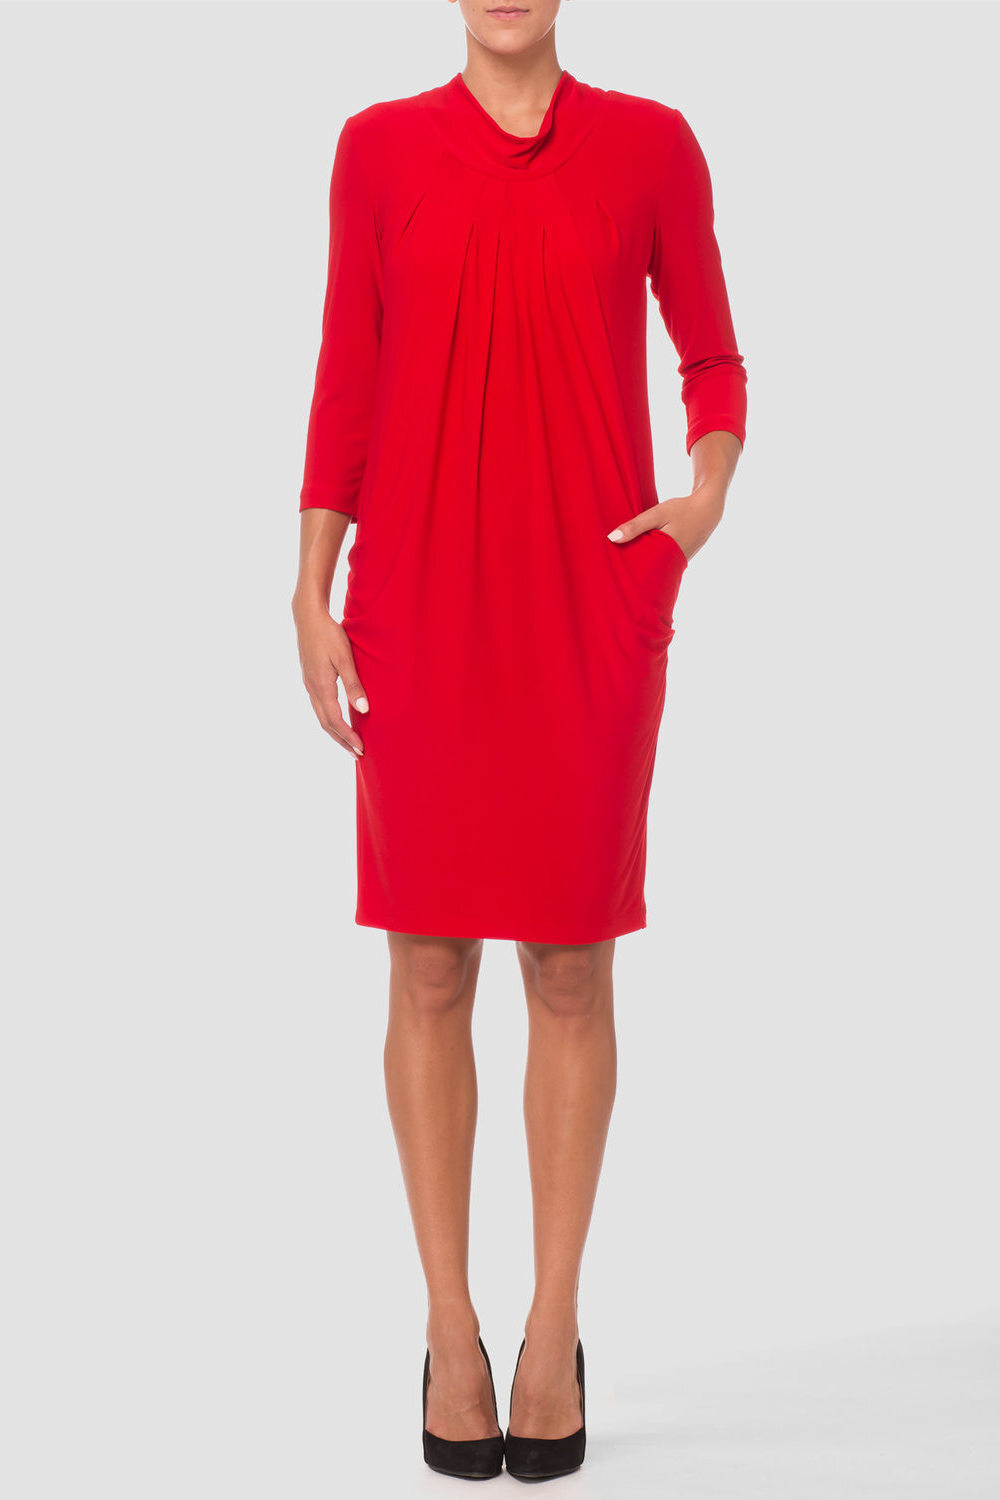 Joseph Ribkoff robe style 173030. Rouge A Levres 173